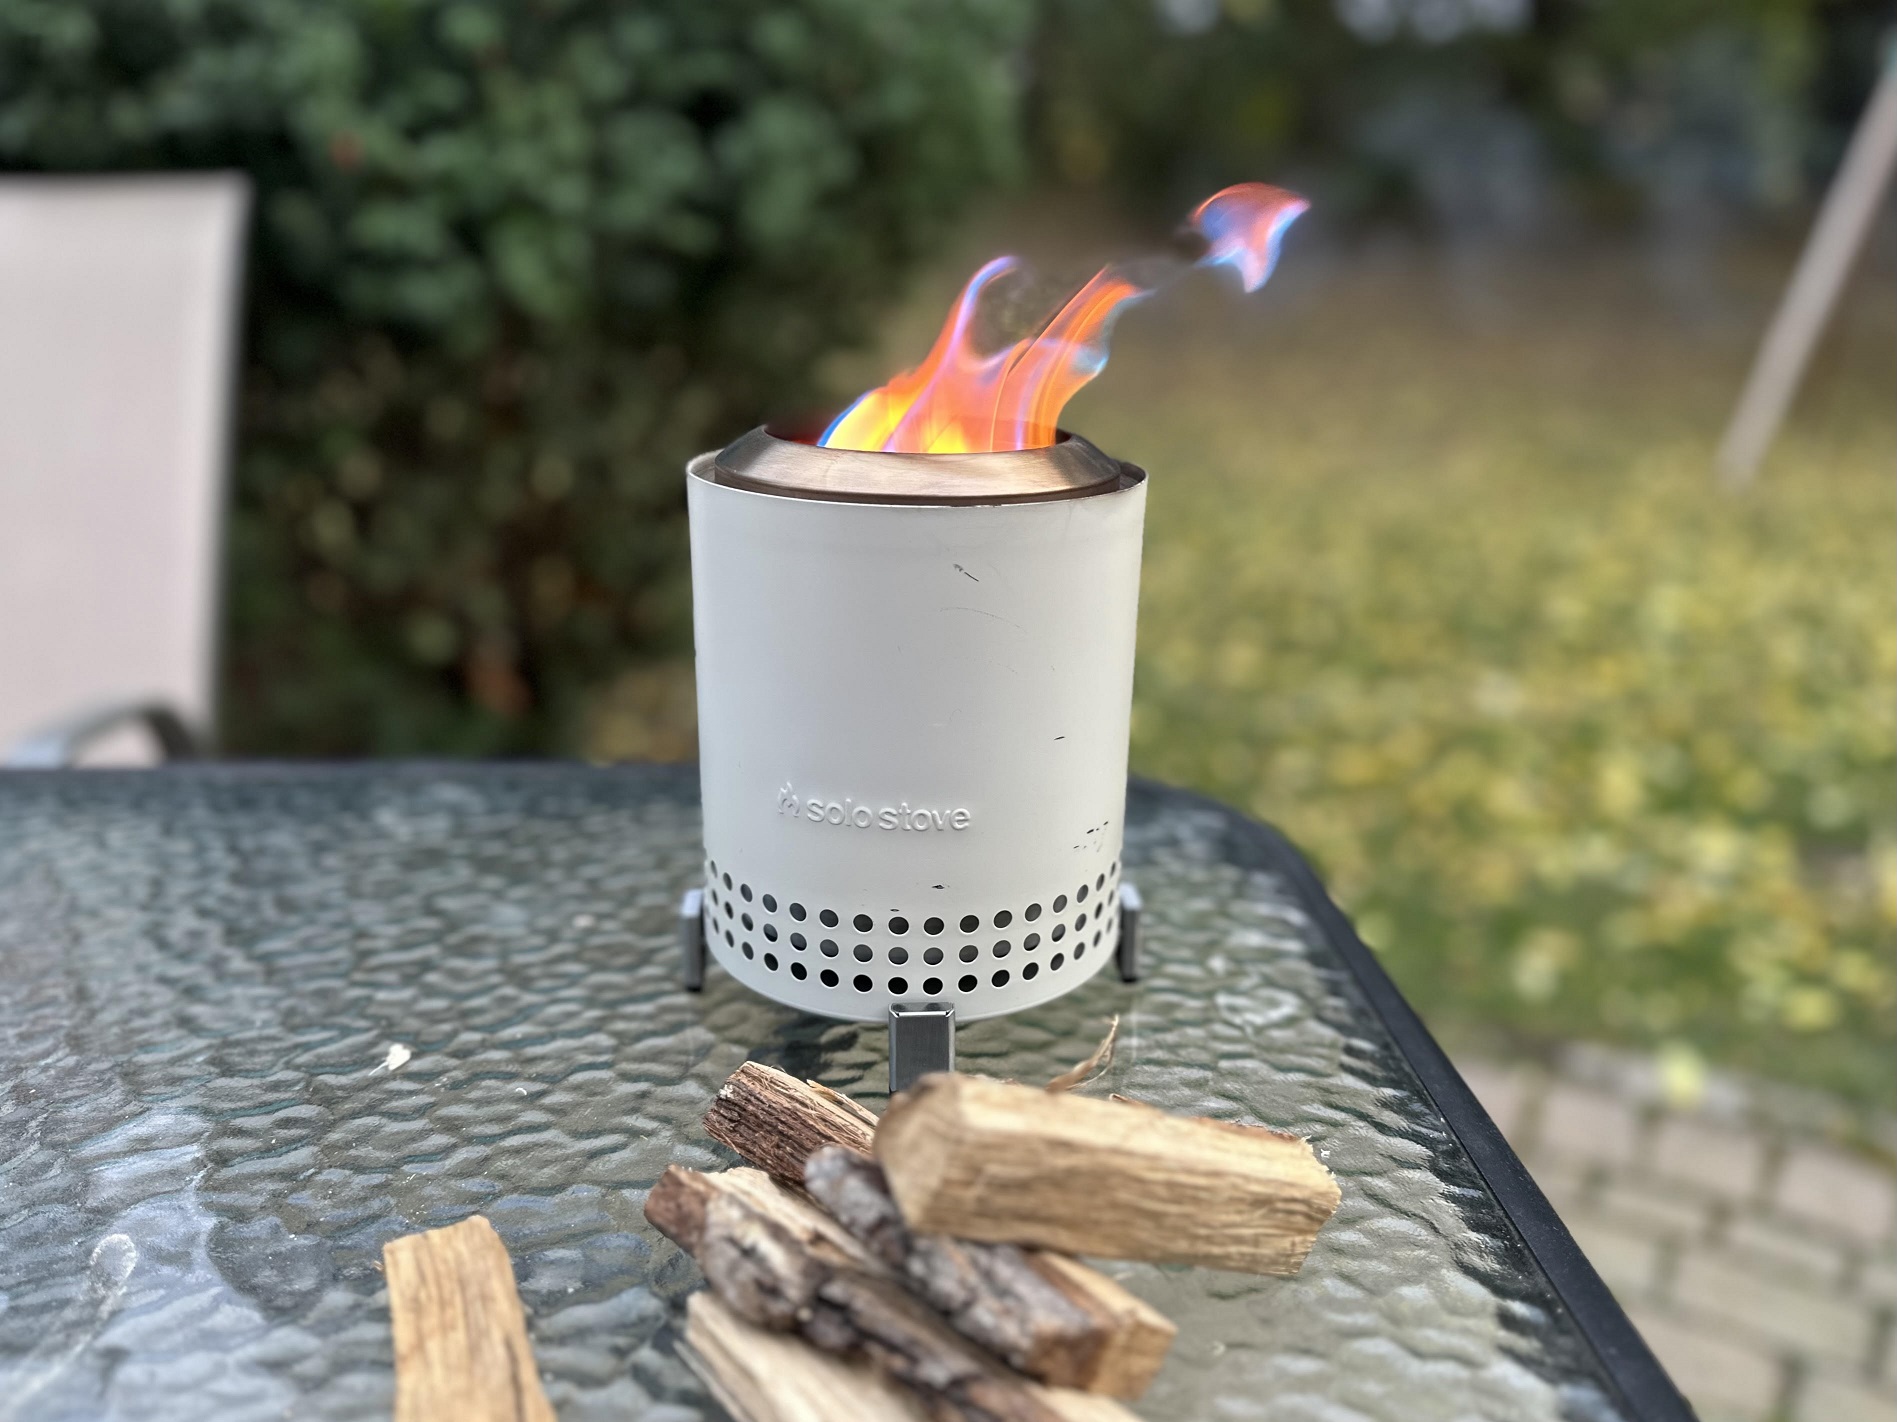 https://www.cookoutnews.com/wp-content/uploads/2022/10/Solo-Stove-Mesa-with-Mini-Oak-Firewood-and-Color-Pack-1.jpg